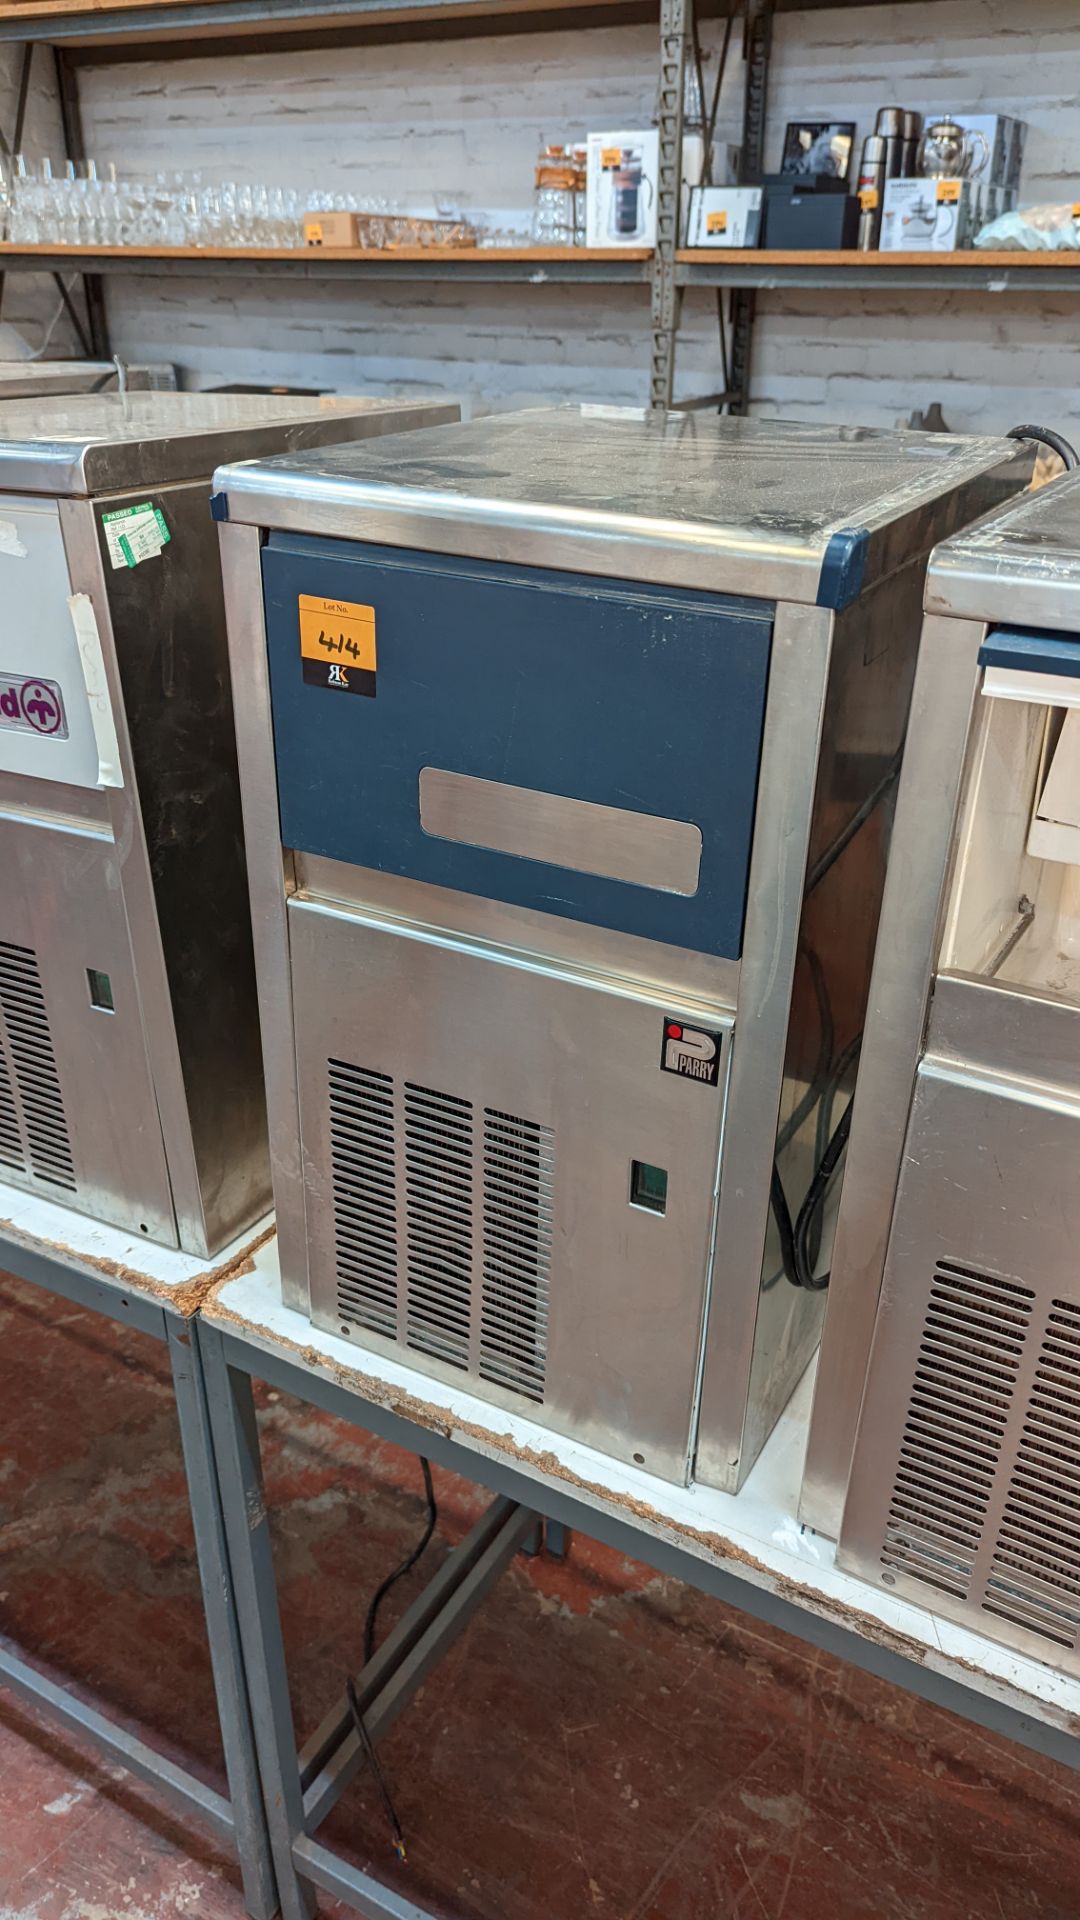 Parry stainless steel compact commercial ice maker model PIM20